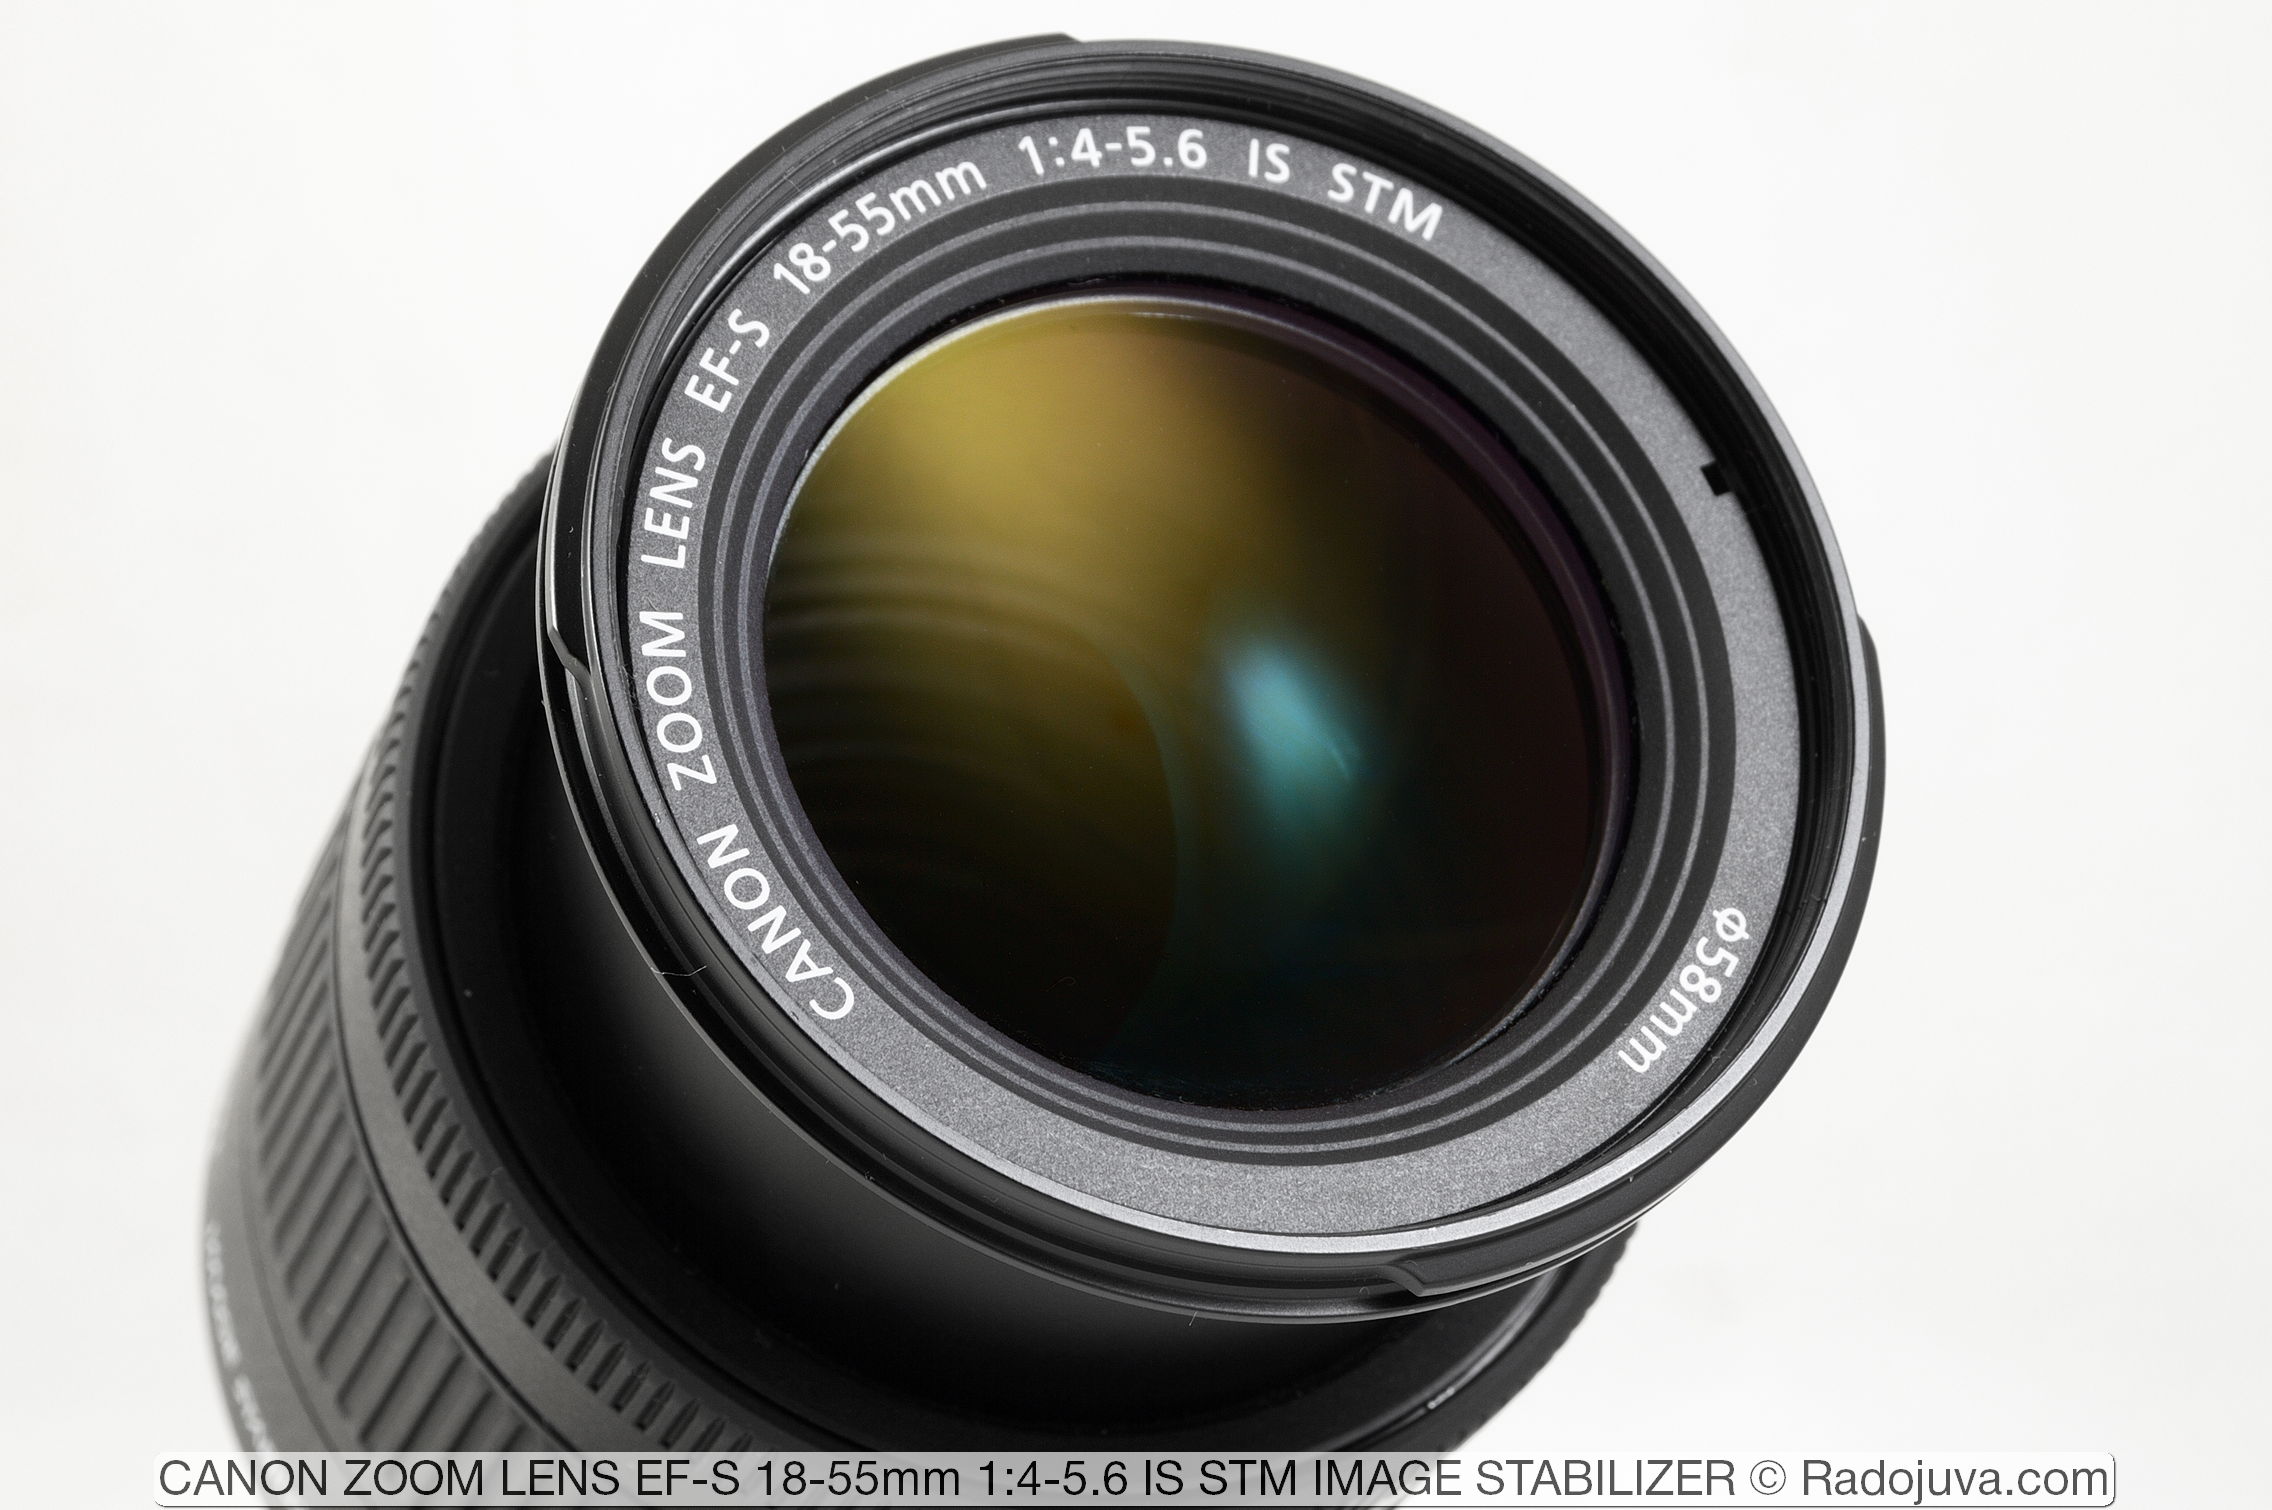 Review of Canon Zoom Lens EF-S 18-55mm 1: 4-5.6 IS STM Happy